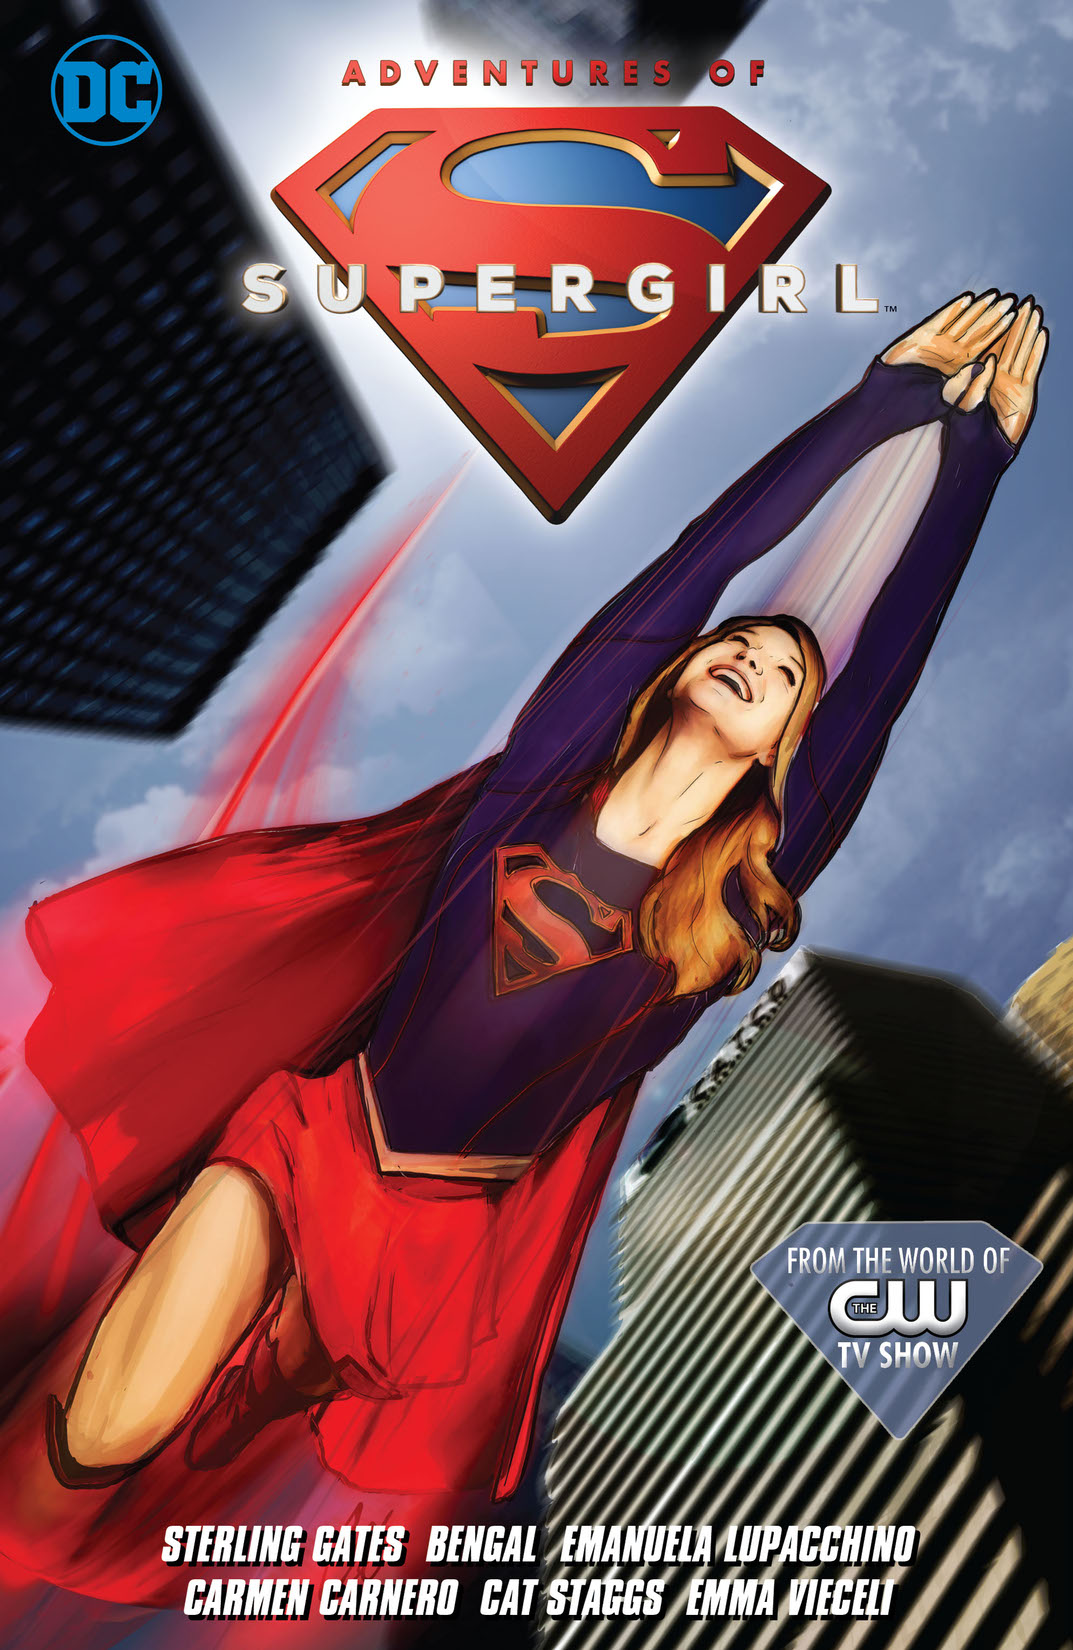 Adventures of Supergirl Vol. 1 preview images